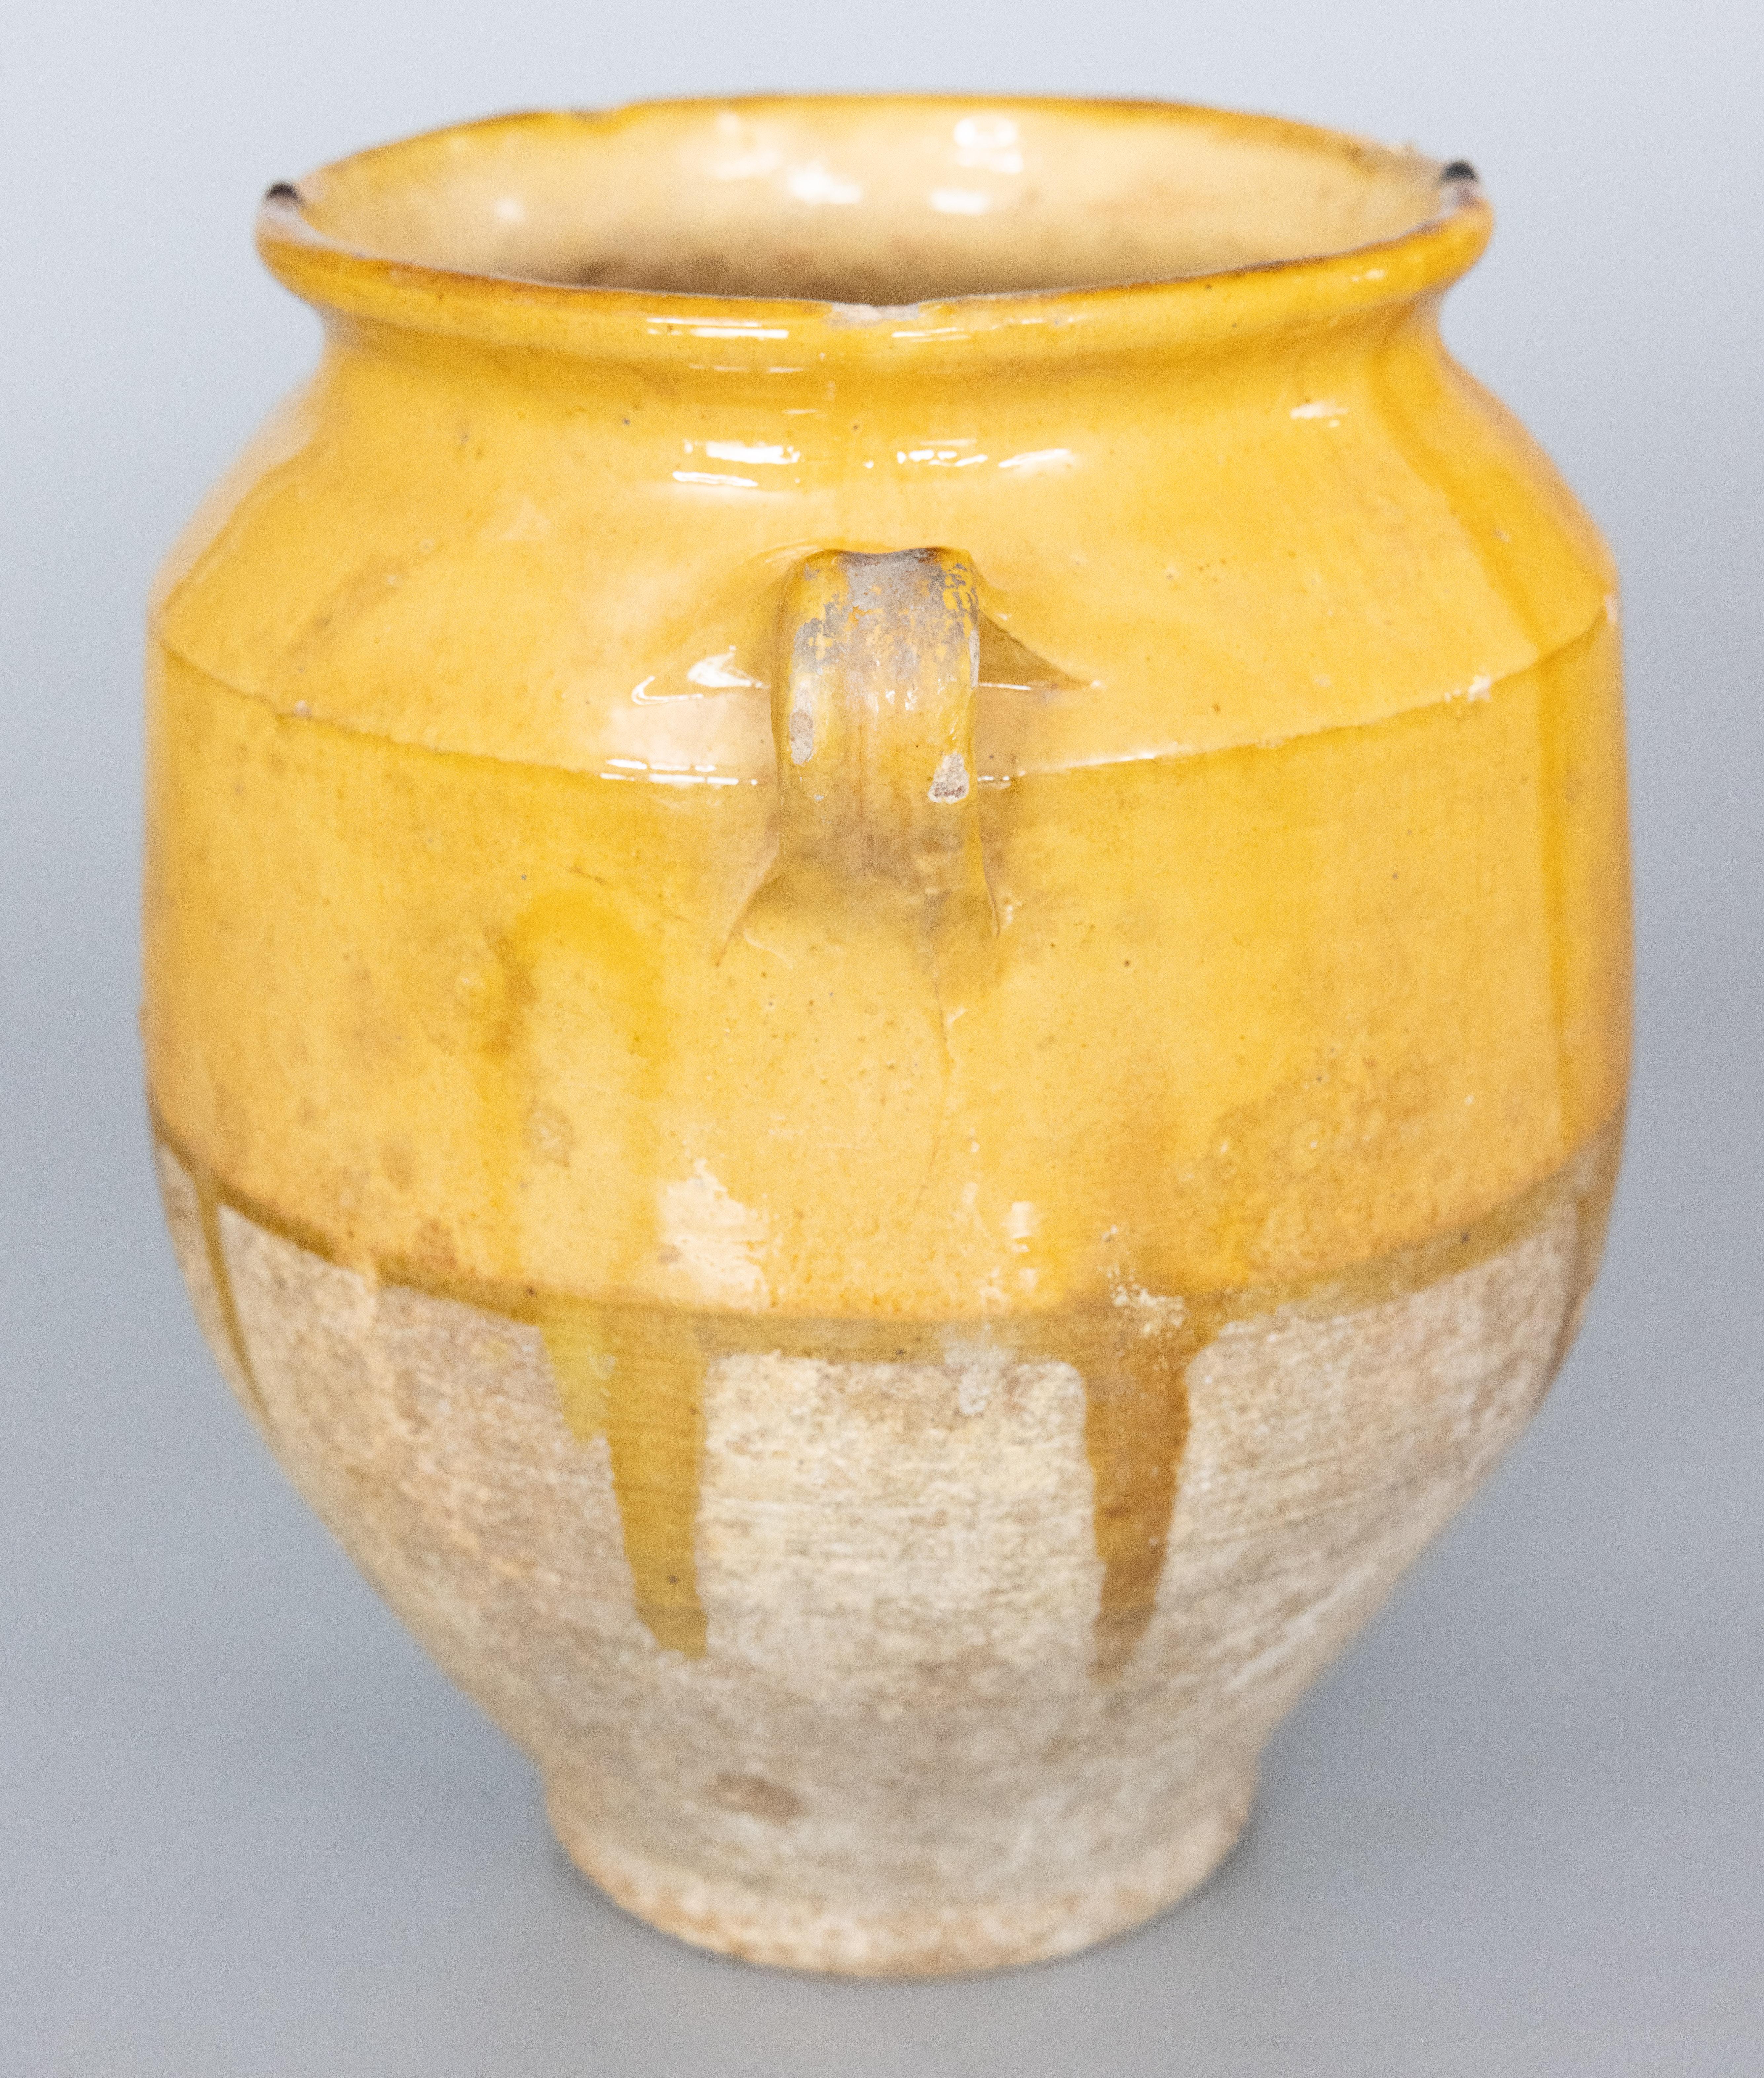 A lovely antique 19th century French confit pot with lovely drippy mustard yellow glaze from the South of France, Castelnaudary. This pot or planter is hand thrown with charming handles known as 'ears'. These jars were used for storing and